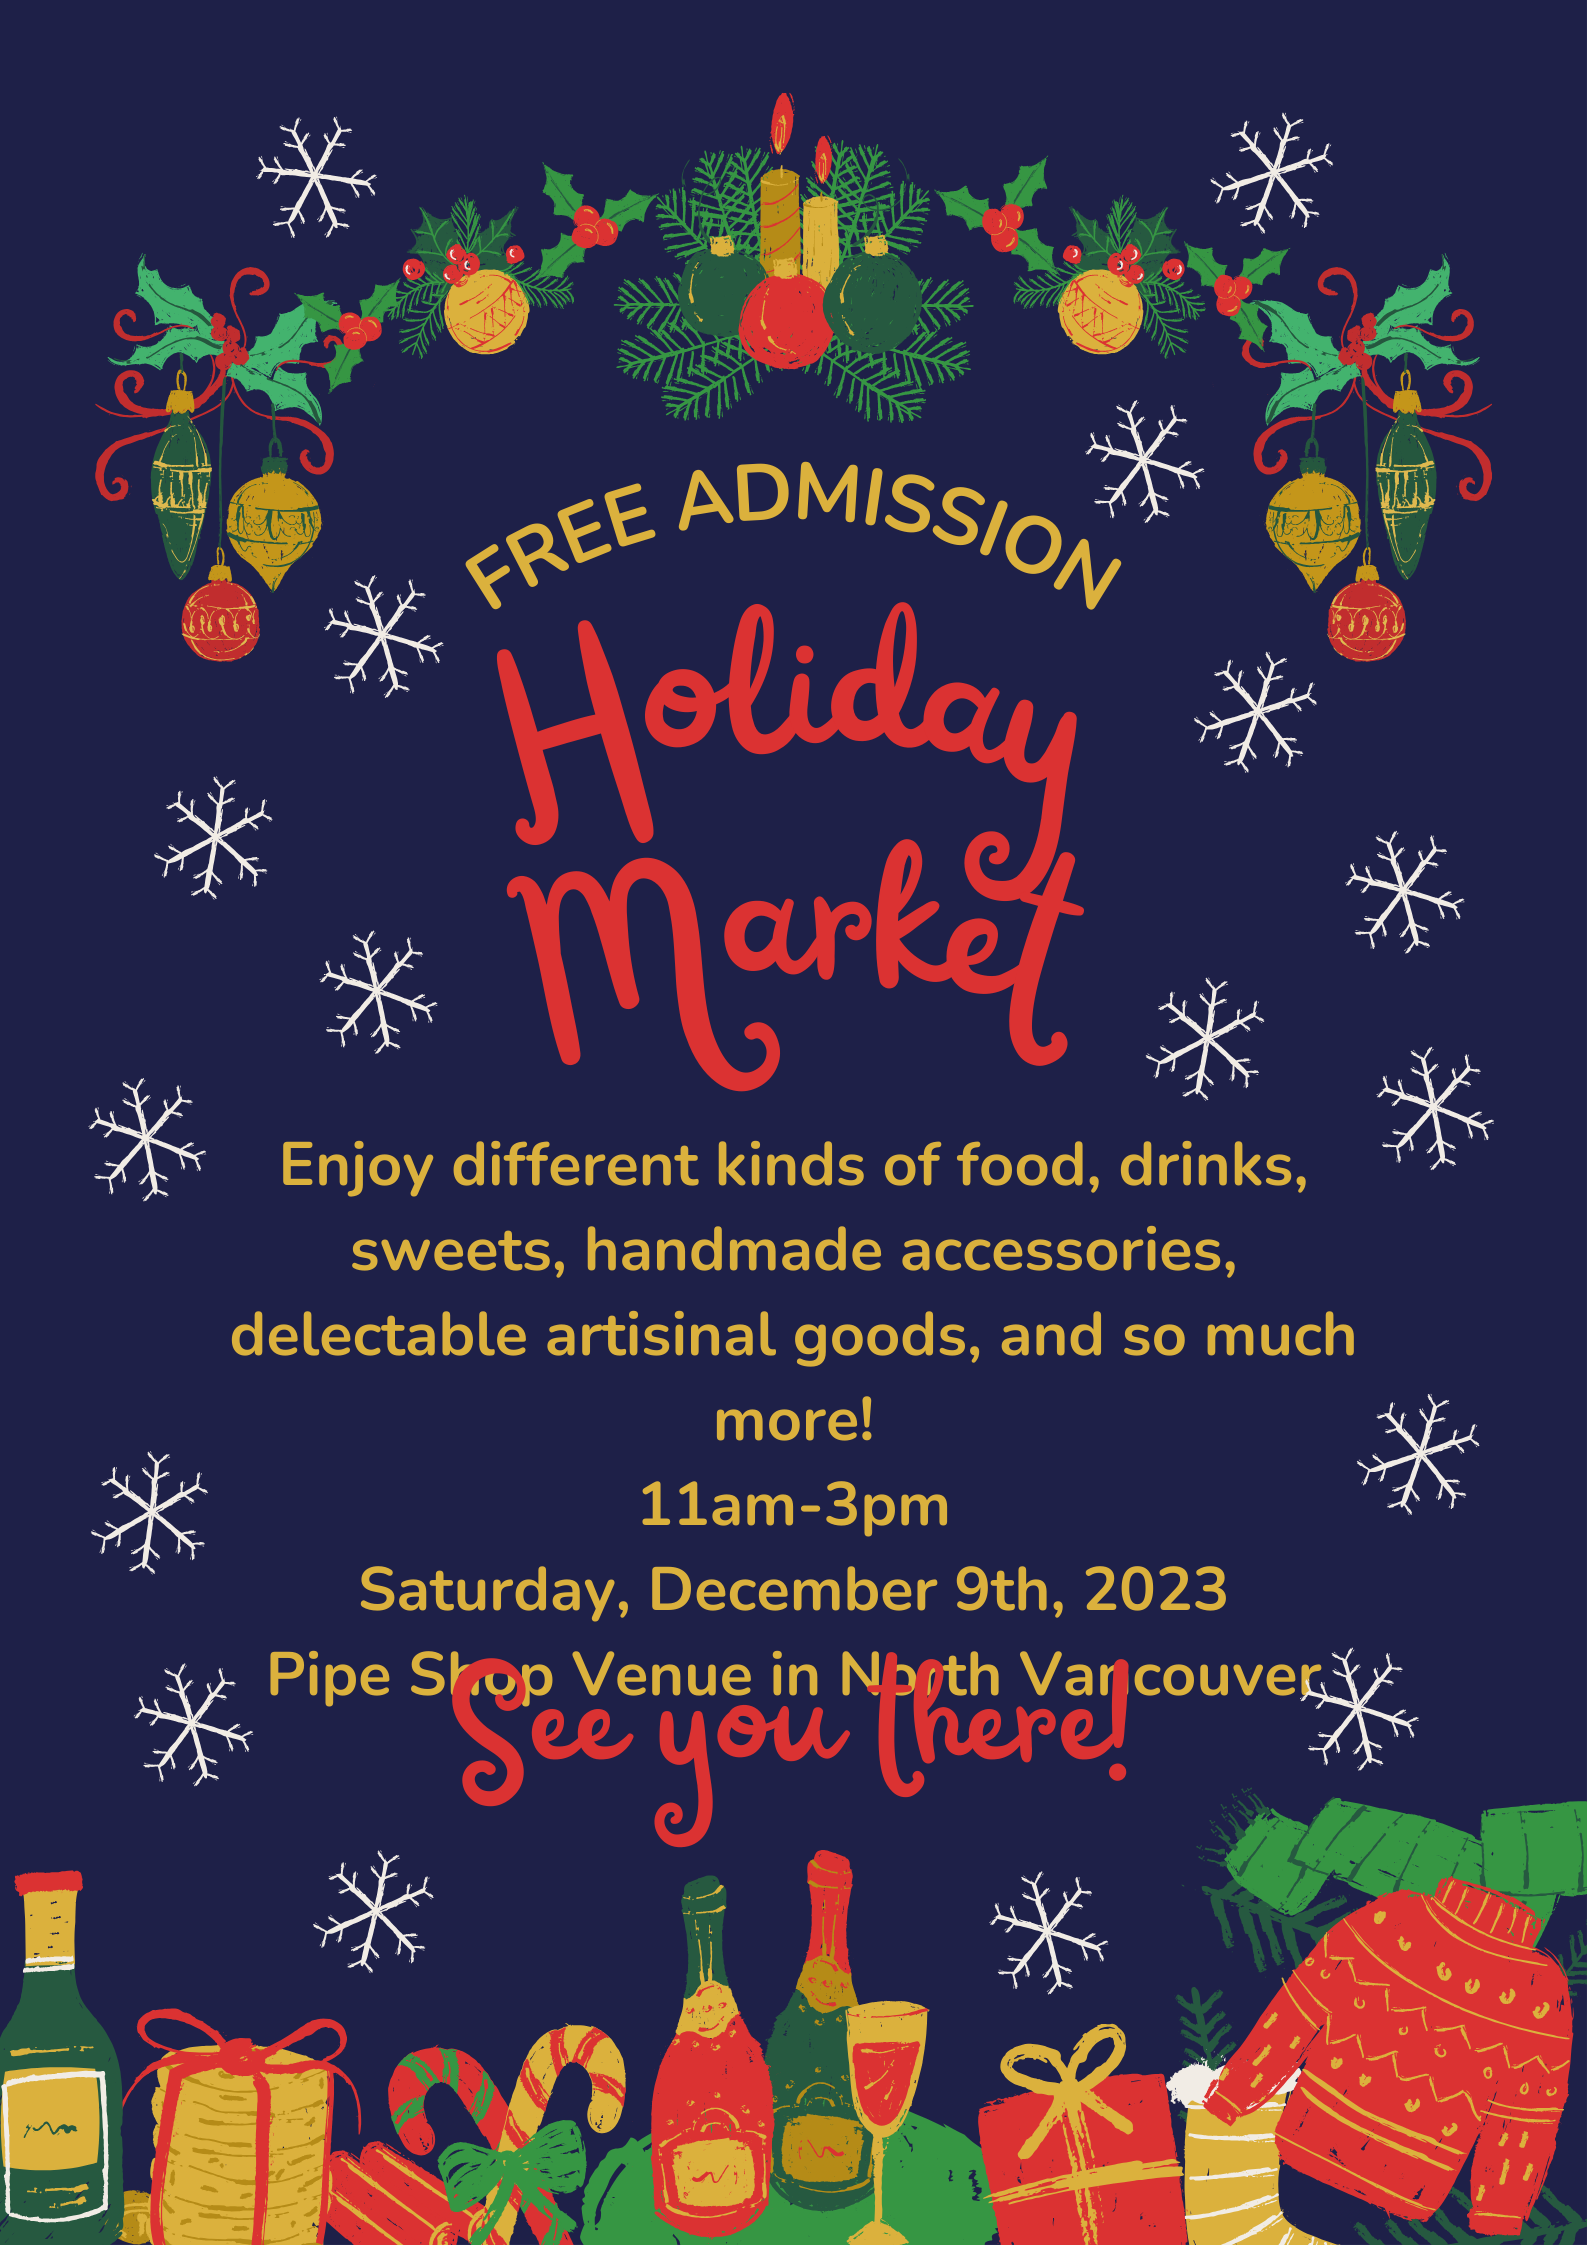 December 9 Holiday Market @the Pipe Shop